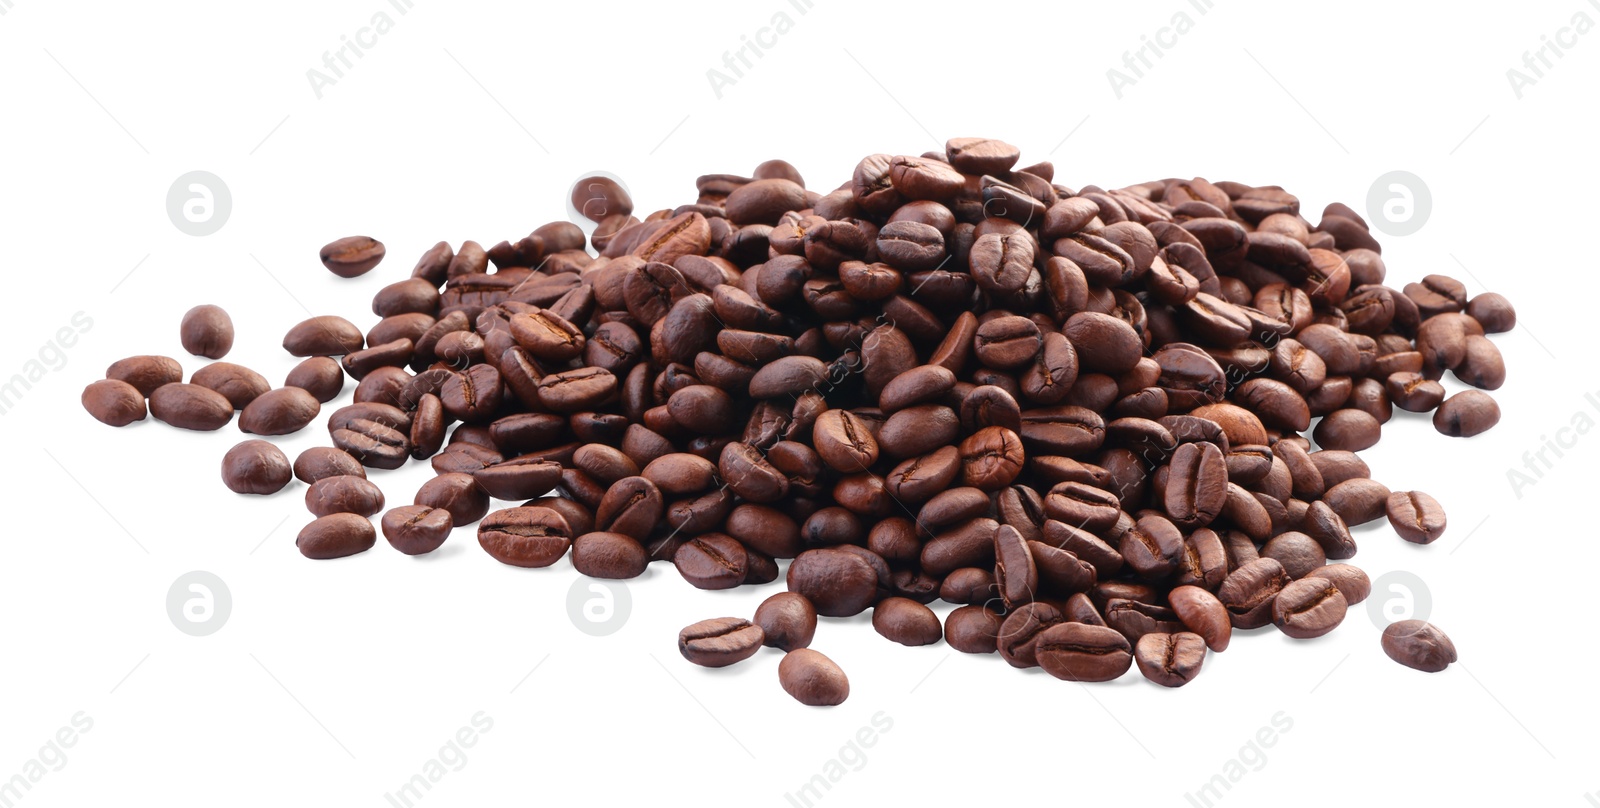 Photo of Pile of roasted coffee beans isolated on white